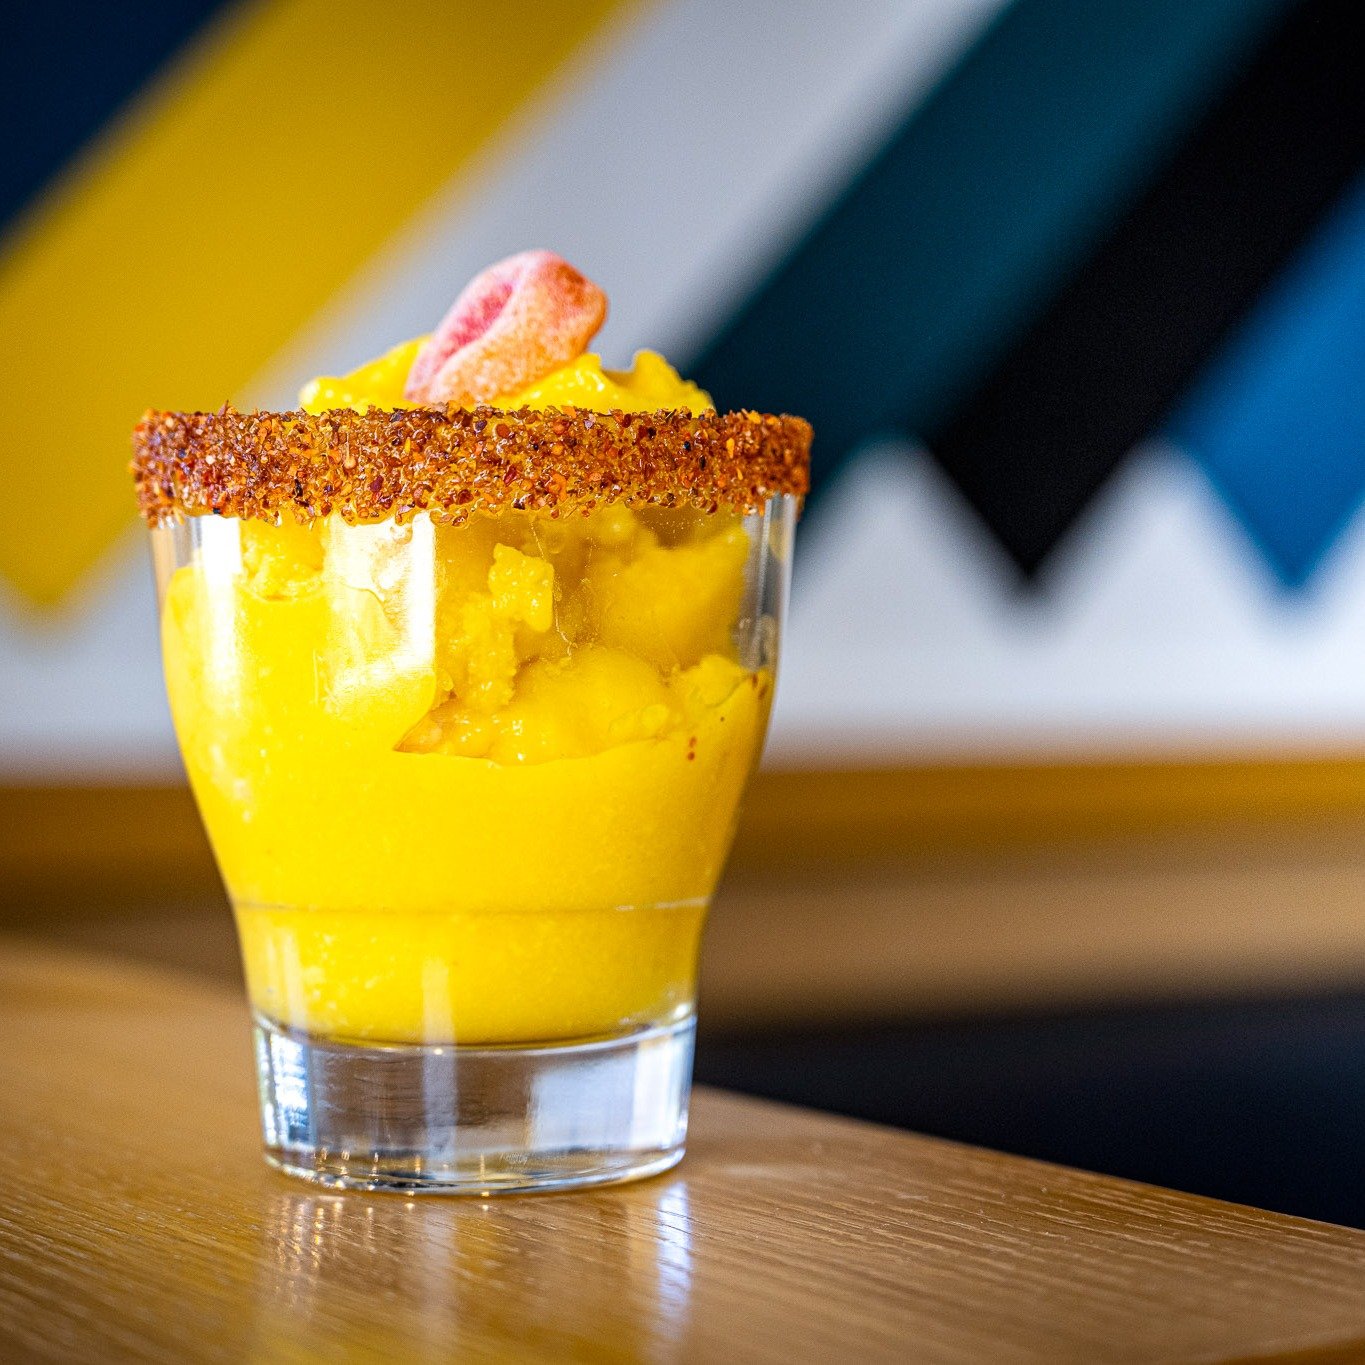 Brightening up your May with our latest creations &hellip;

🍨 Our house-made mango sorbet is finished with a Chamoy and Tajin rimmed glass, and topped with a peach ring.

🍍The Bruschetta Paradiso is crafted with chunky avocado crema, grilled chicke